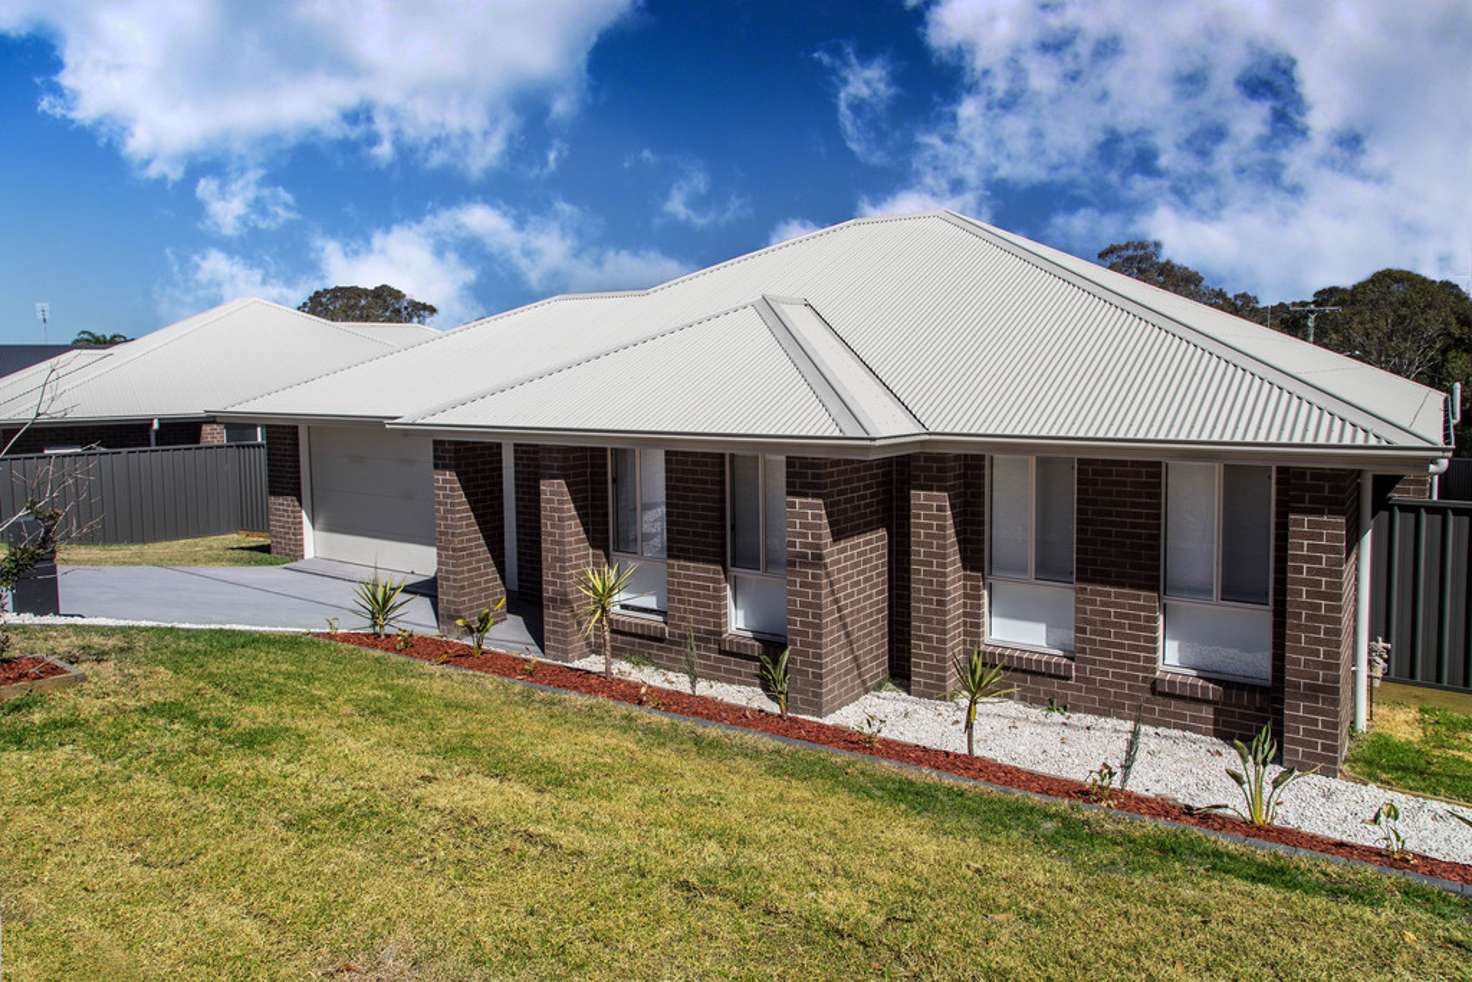 Main view of Homely house listing, 38 RANCLAUD STREET, Booragul NSW 2284